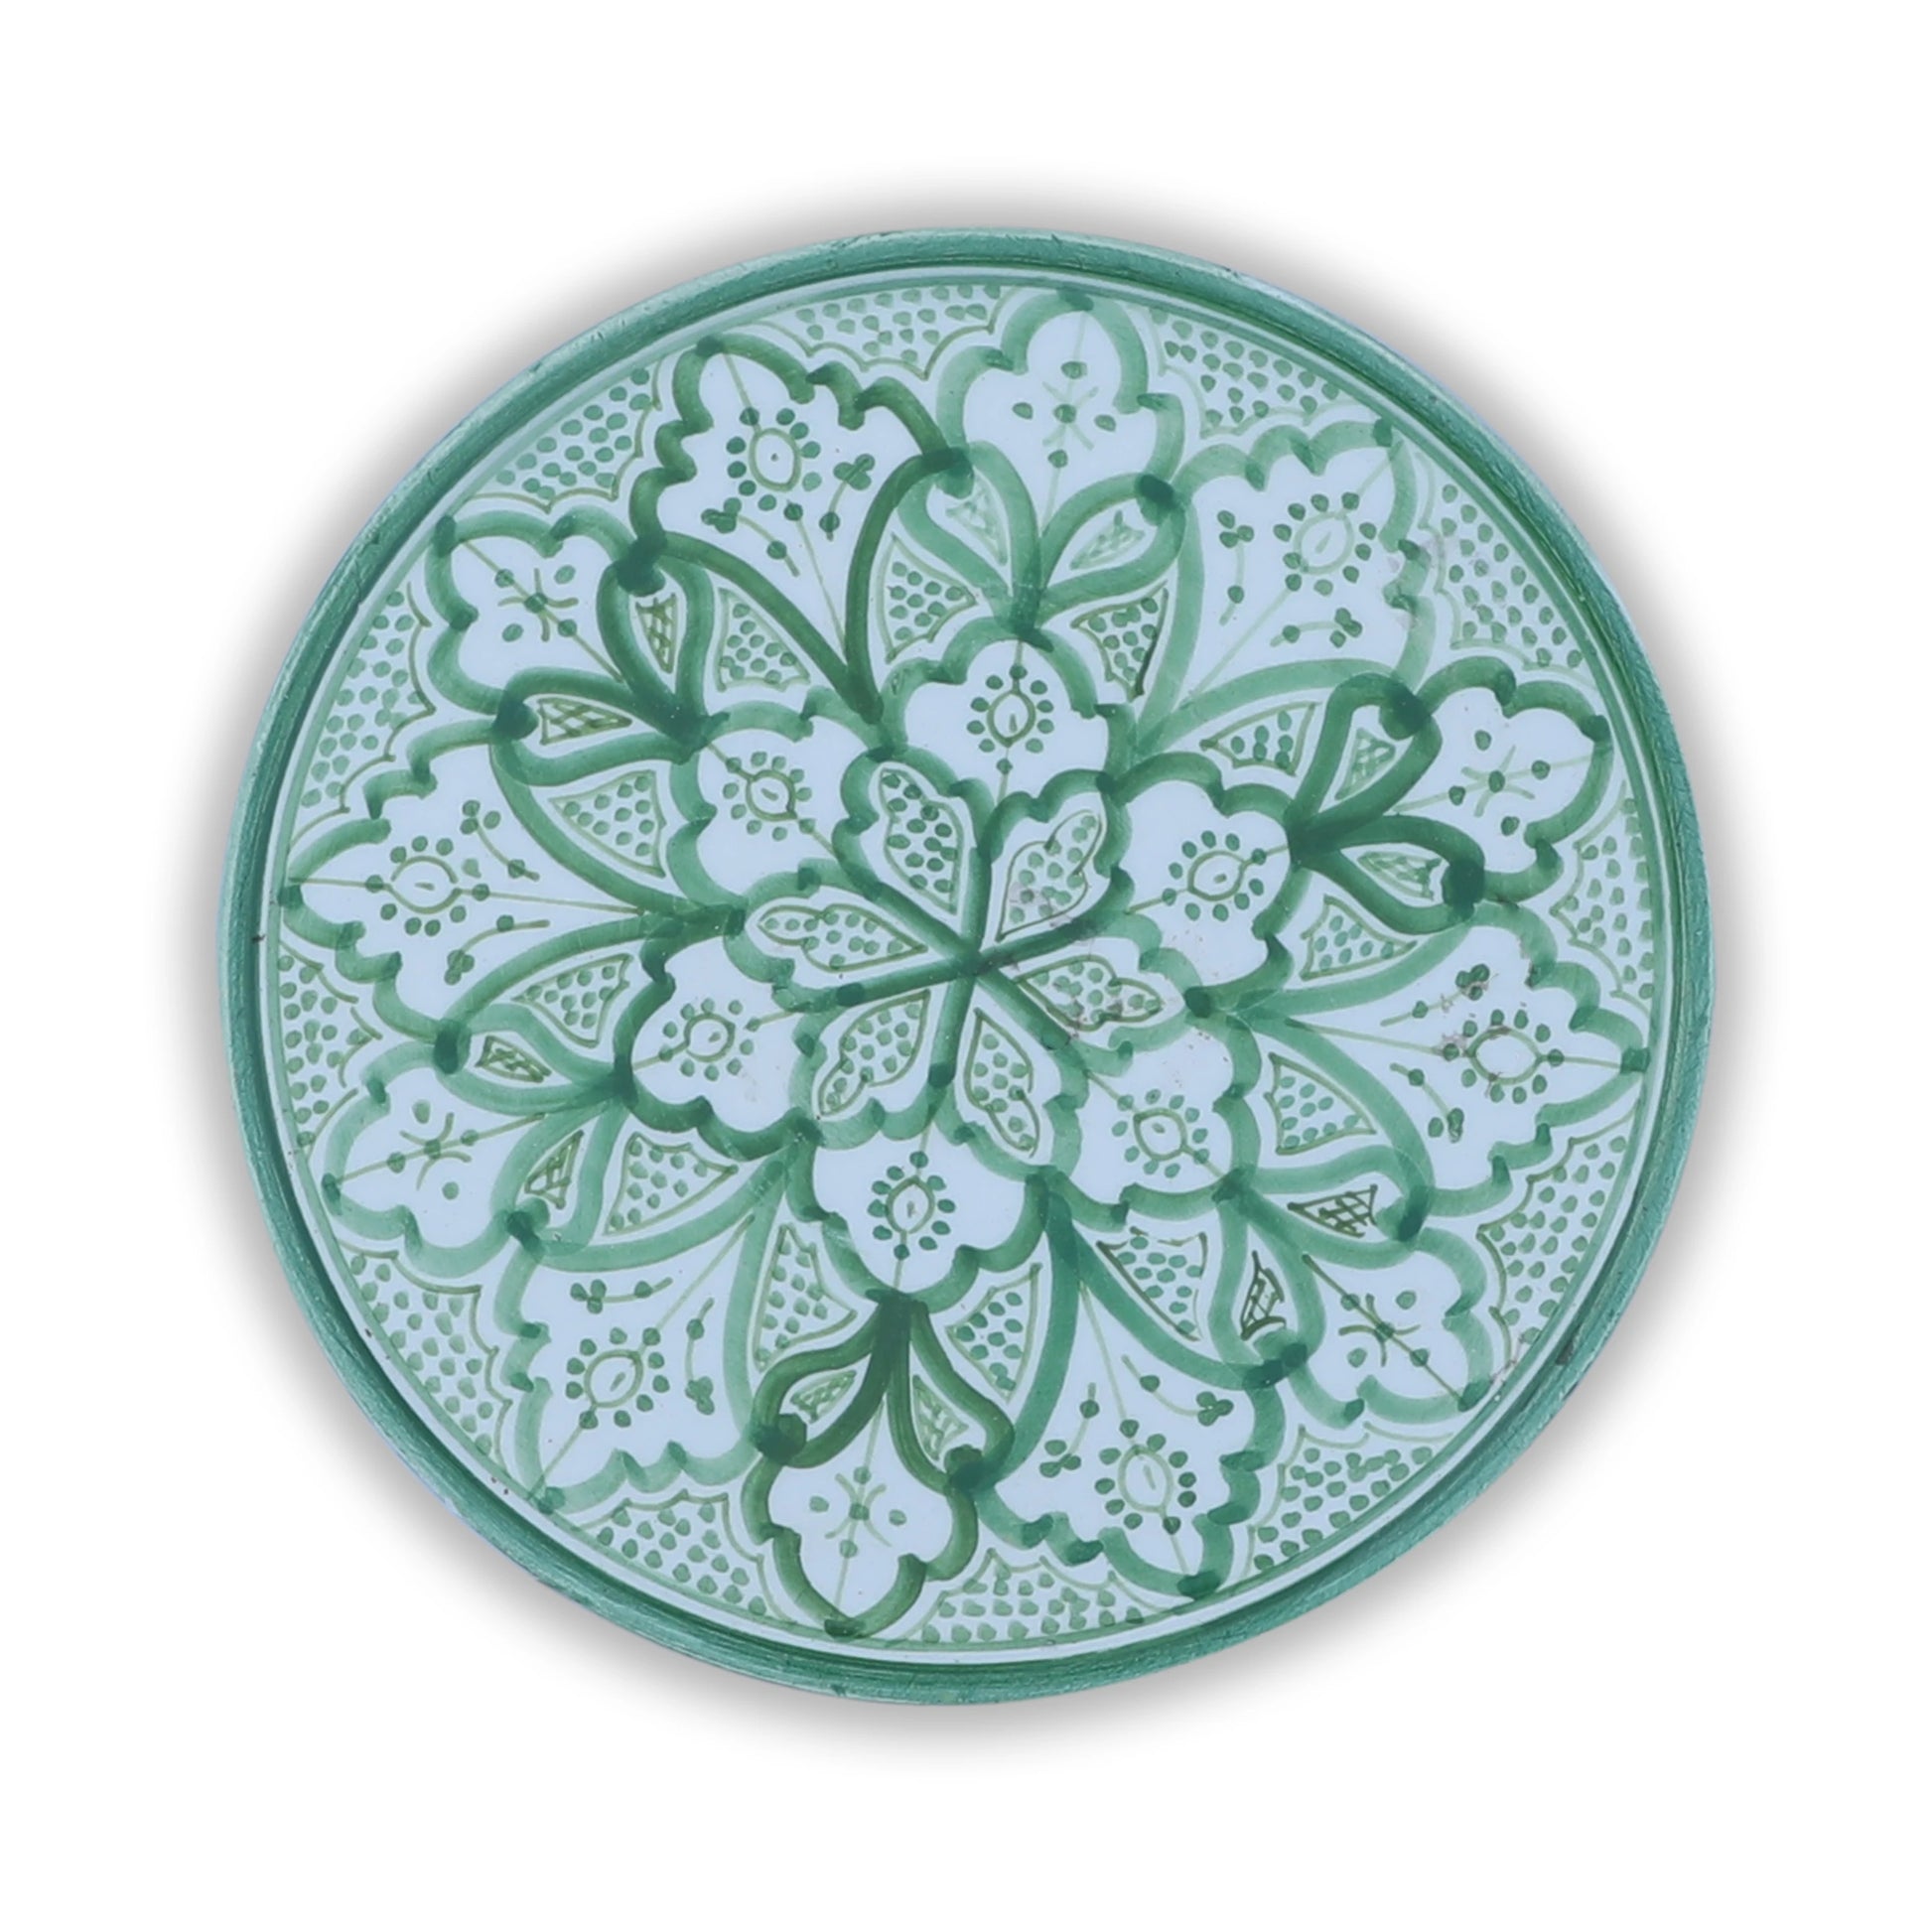 Top View of Handmade Floral Pattern Moroccan Decor Plate